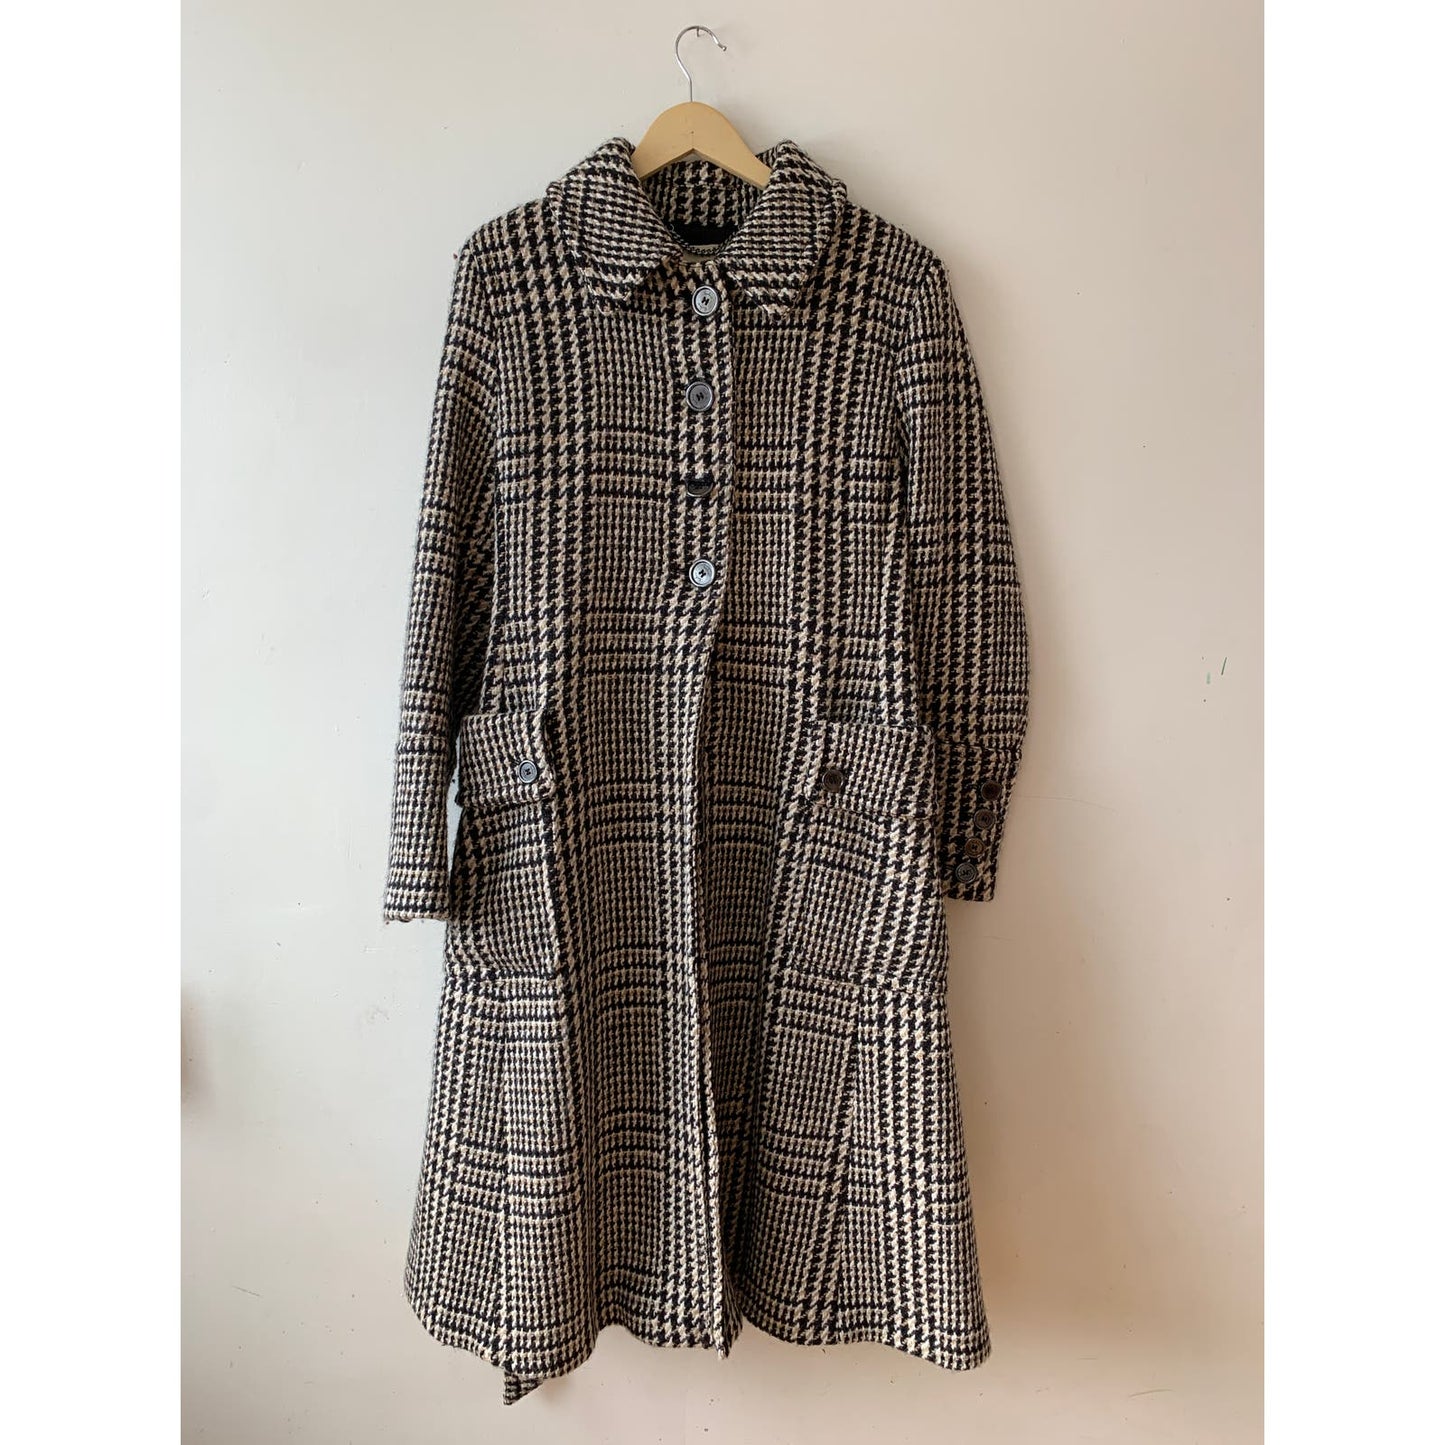 Burberry London Women's Houndstooth Plaid Brown Wool Belted Swing Coat 14